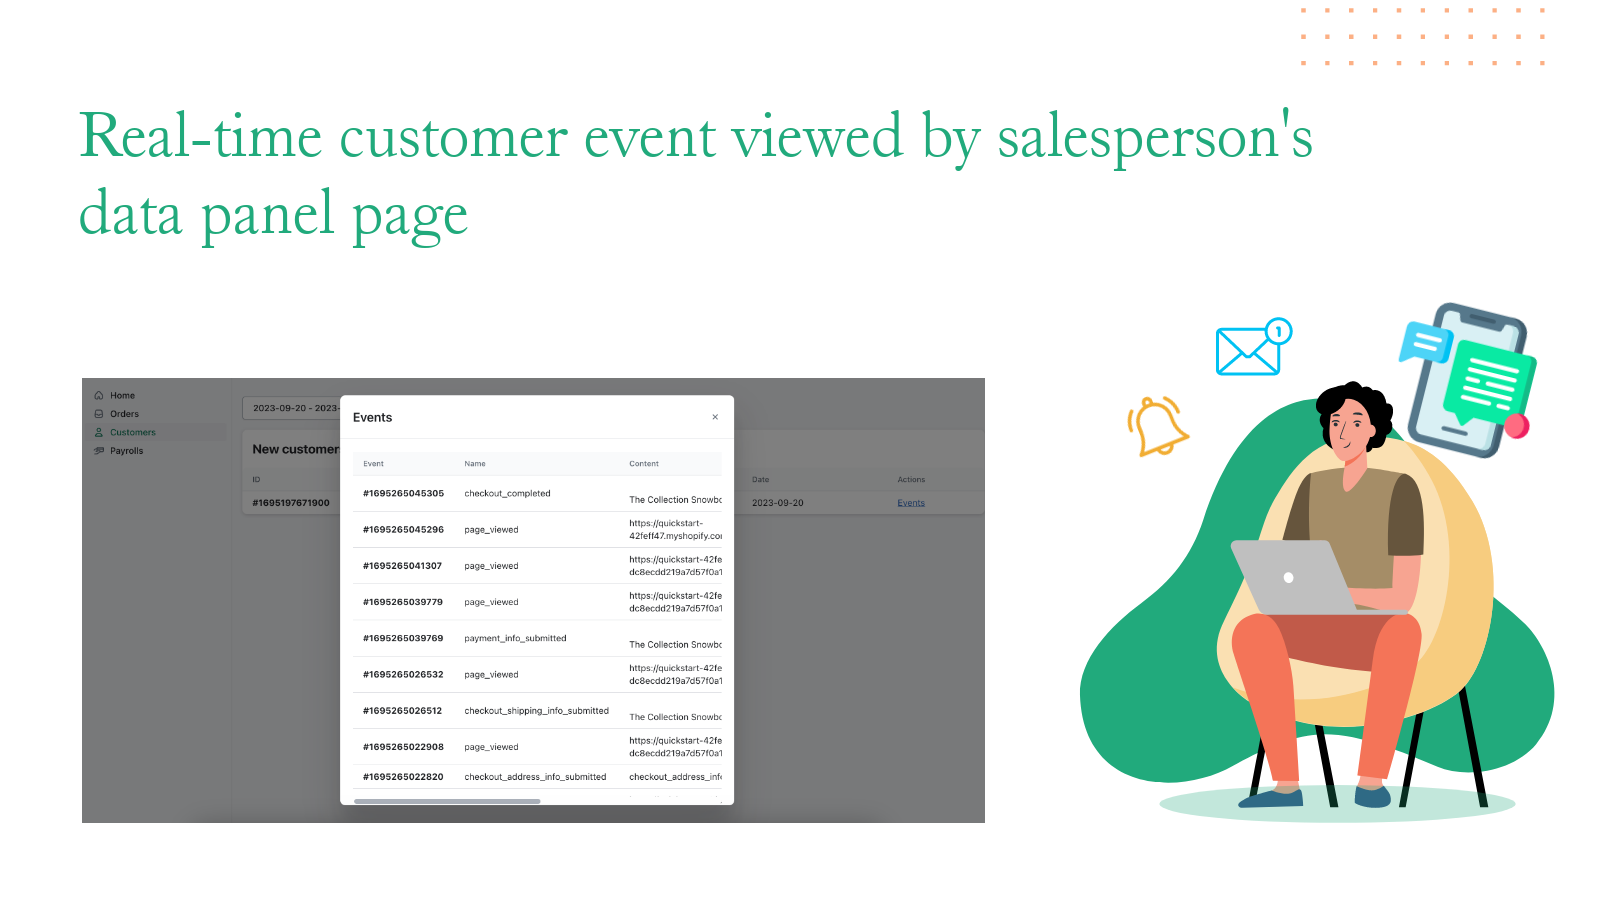 Real-time customer event viewed by salesperson's data panel page